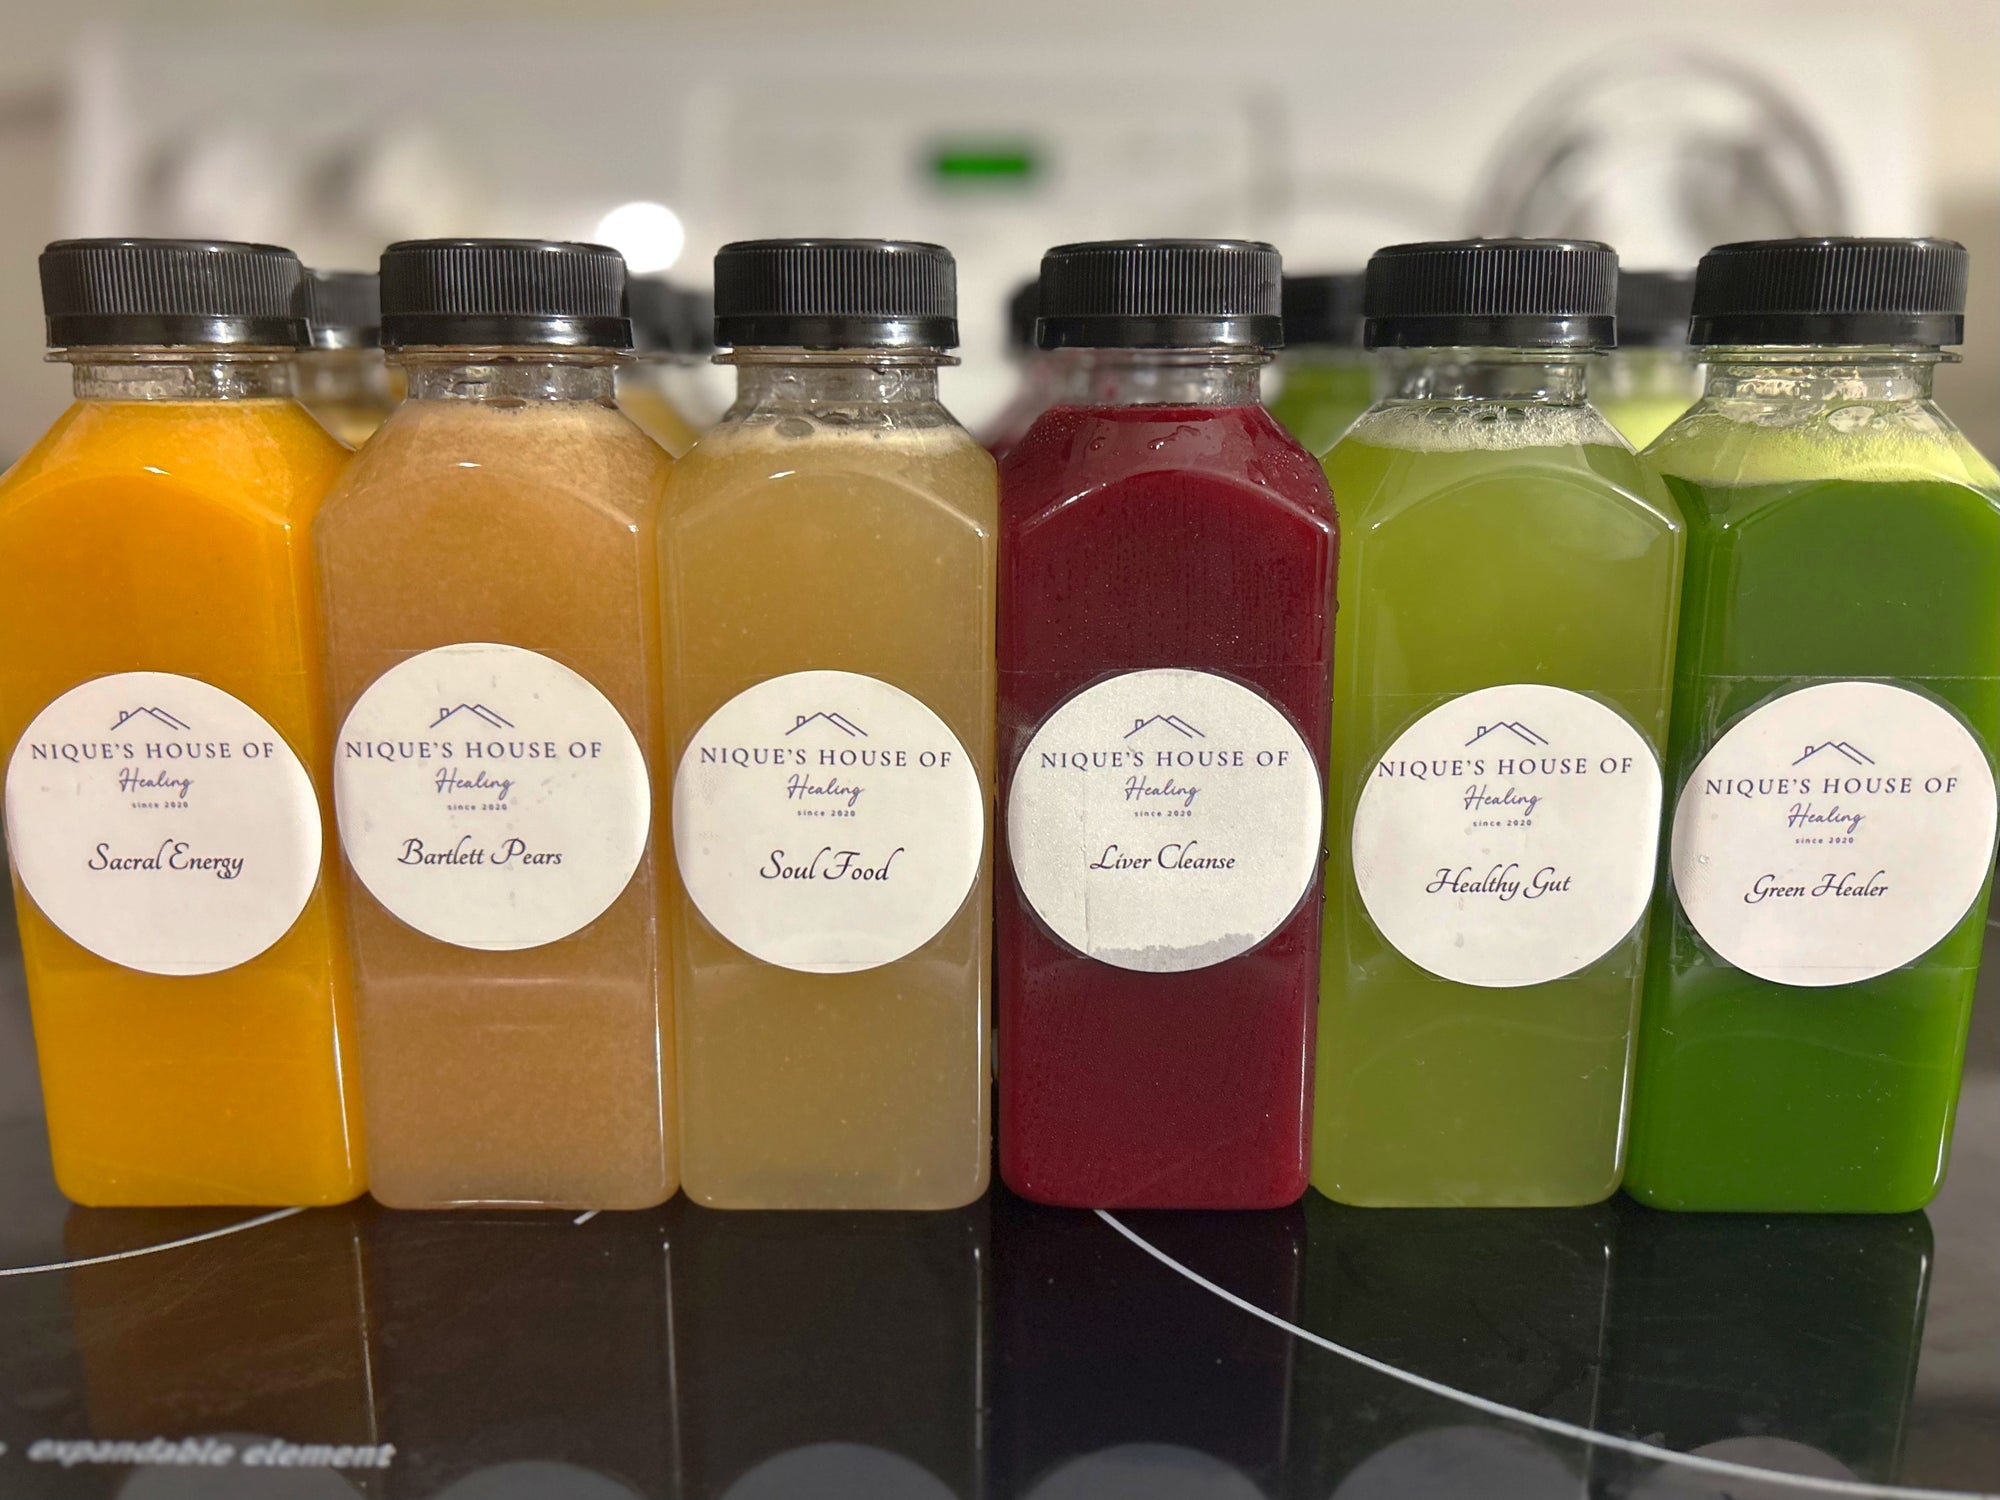 3 day juice cleanse - Nique's House of Healing